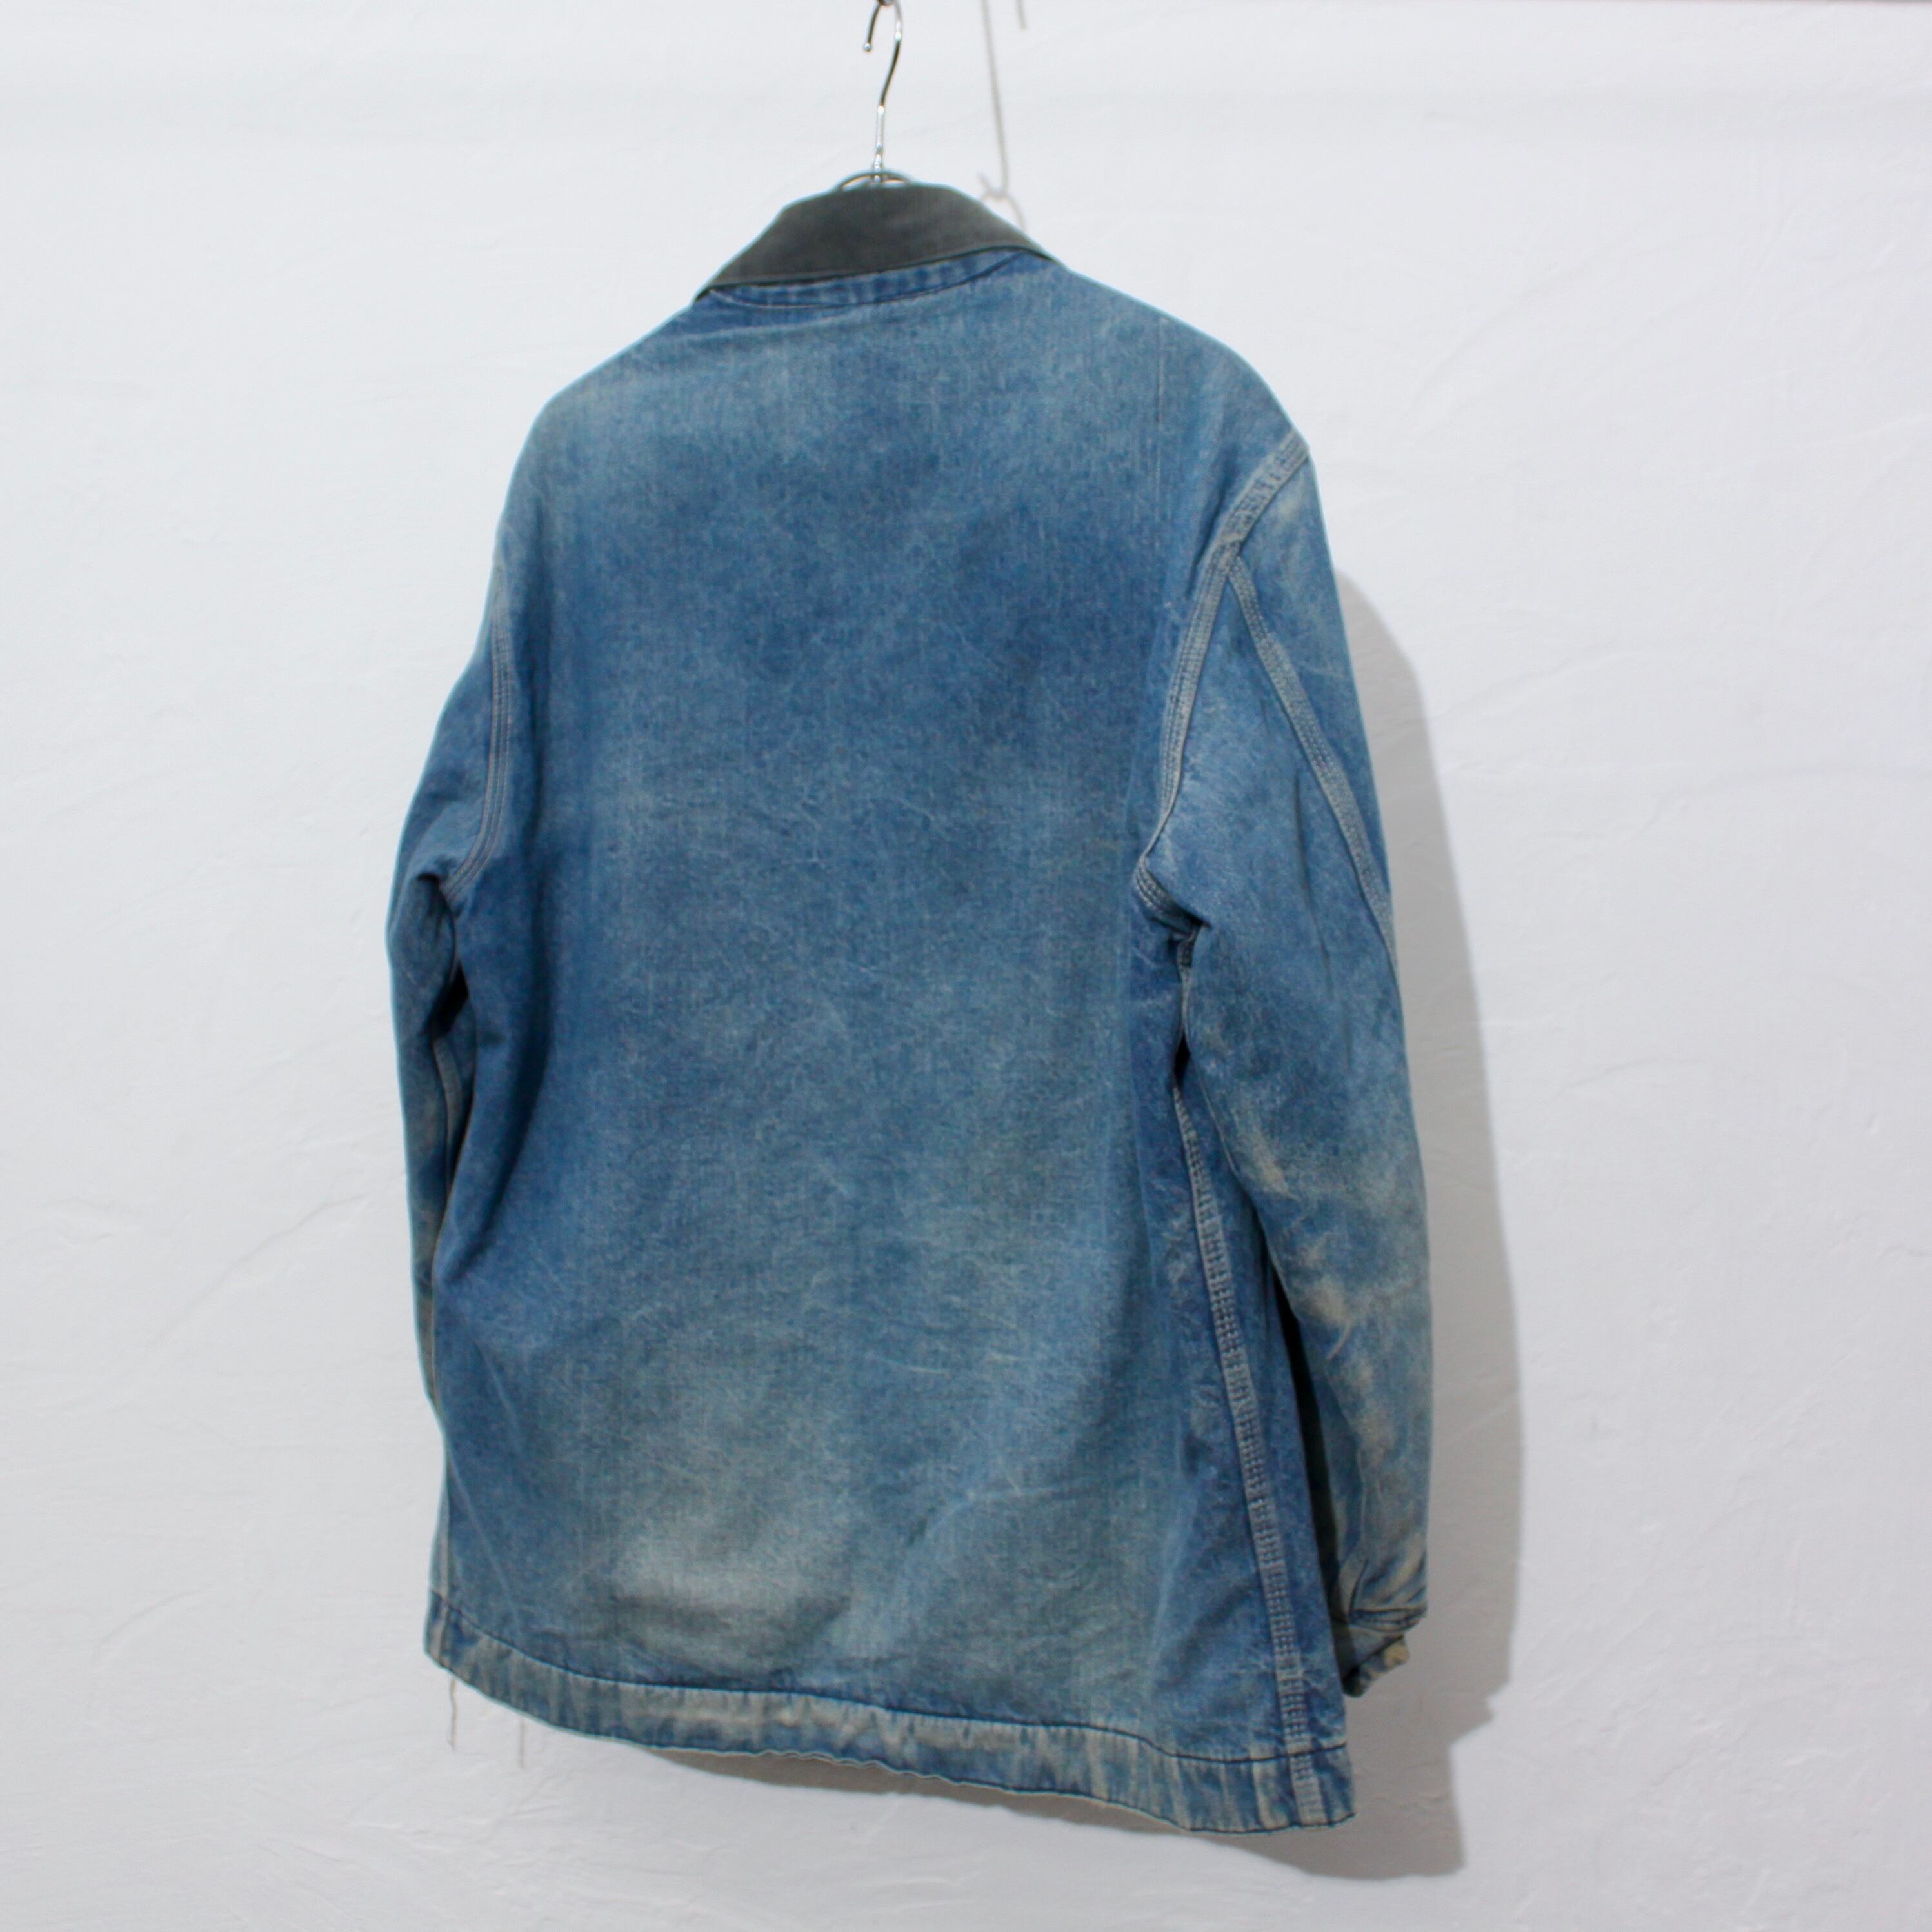 0872. 1970's sears dennim coverall with blanket ブルーデニム